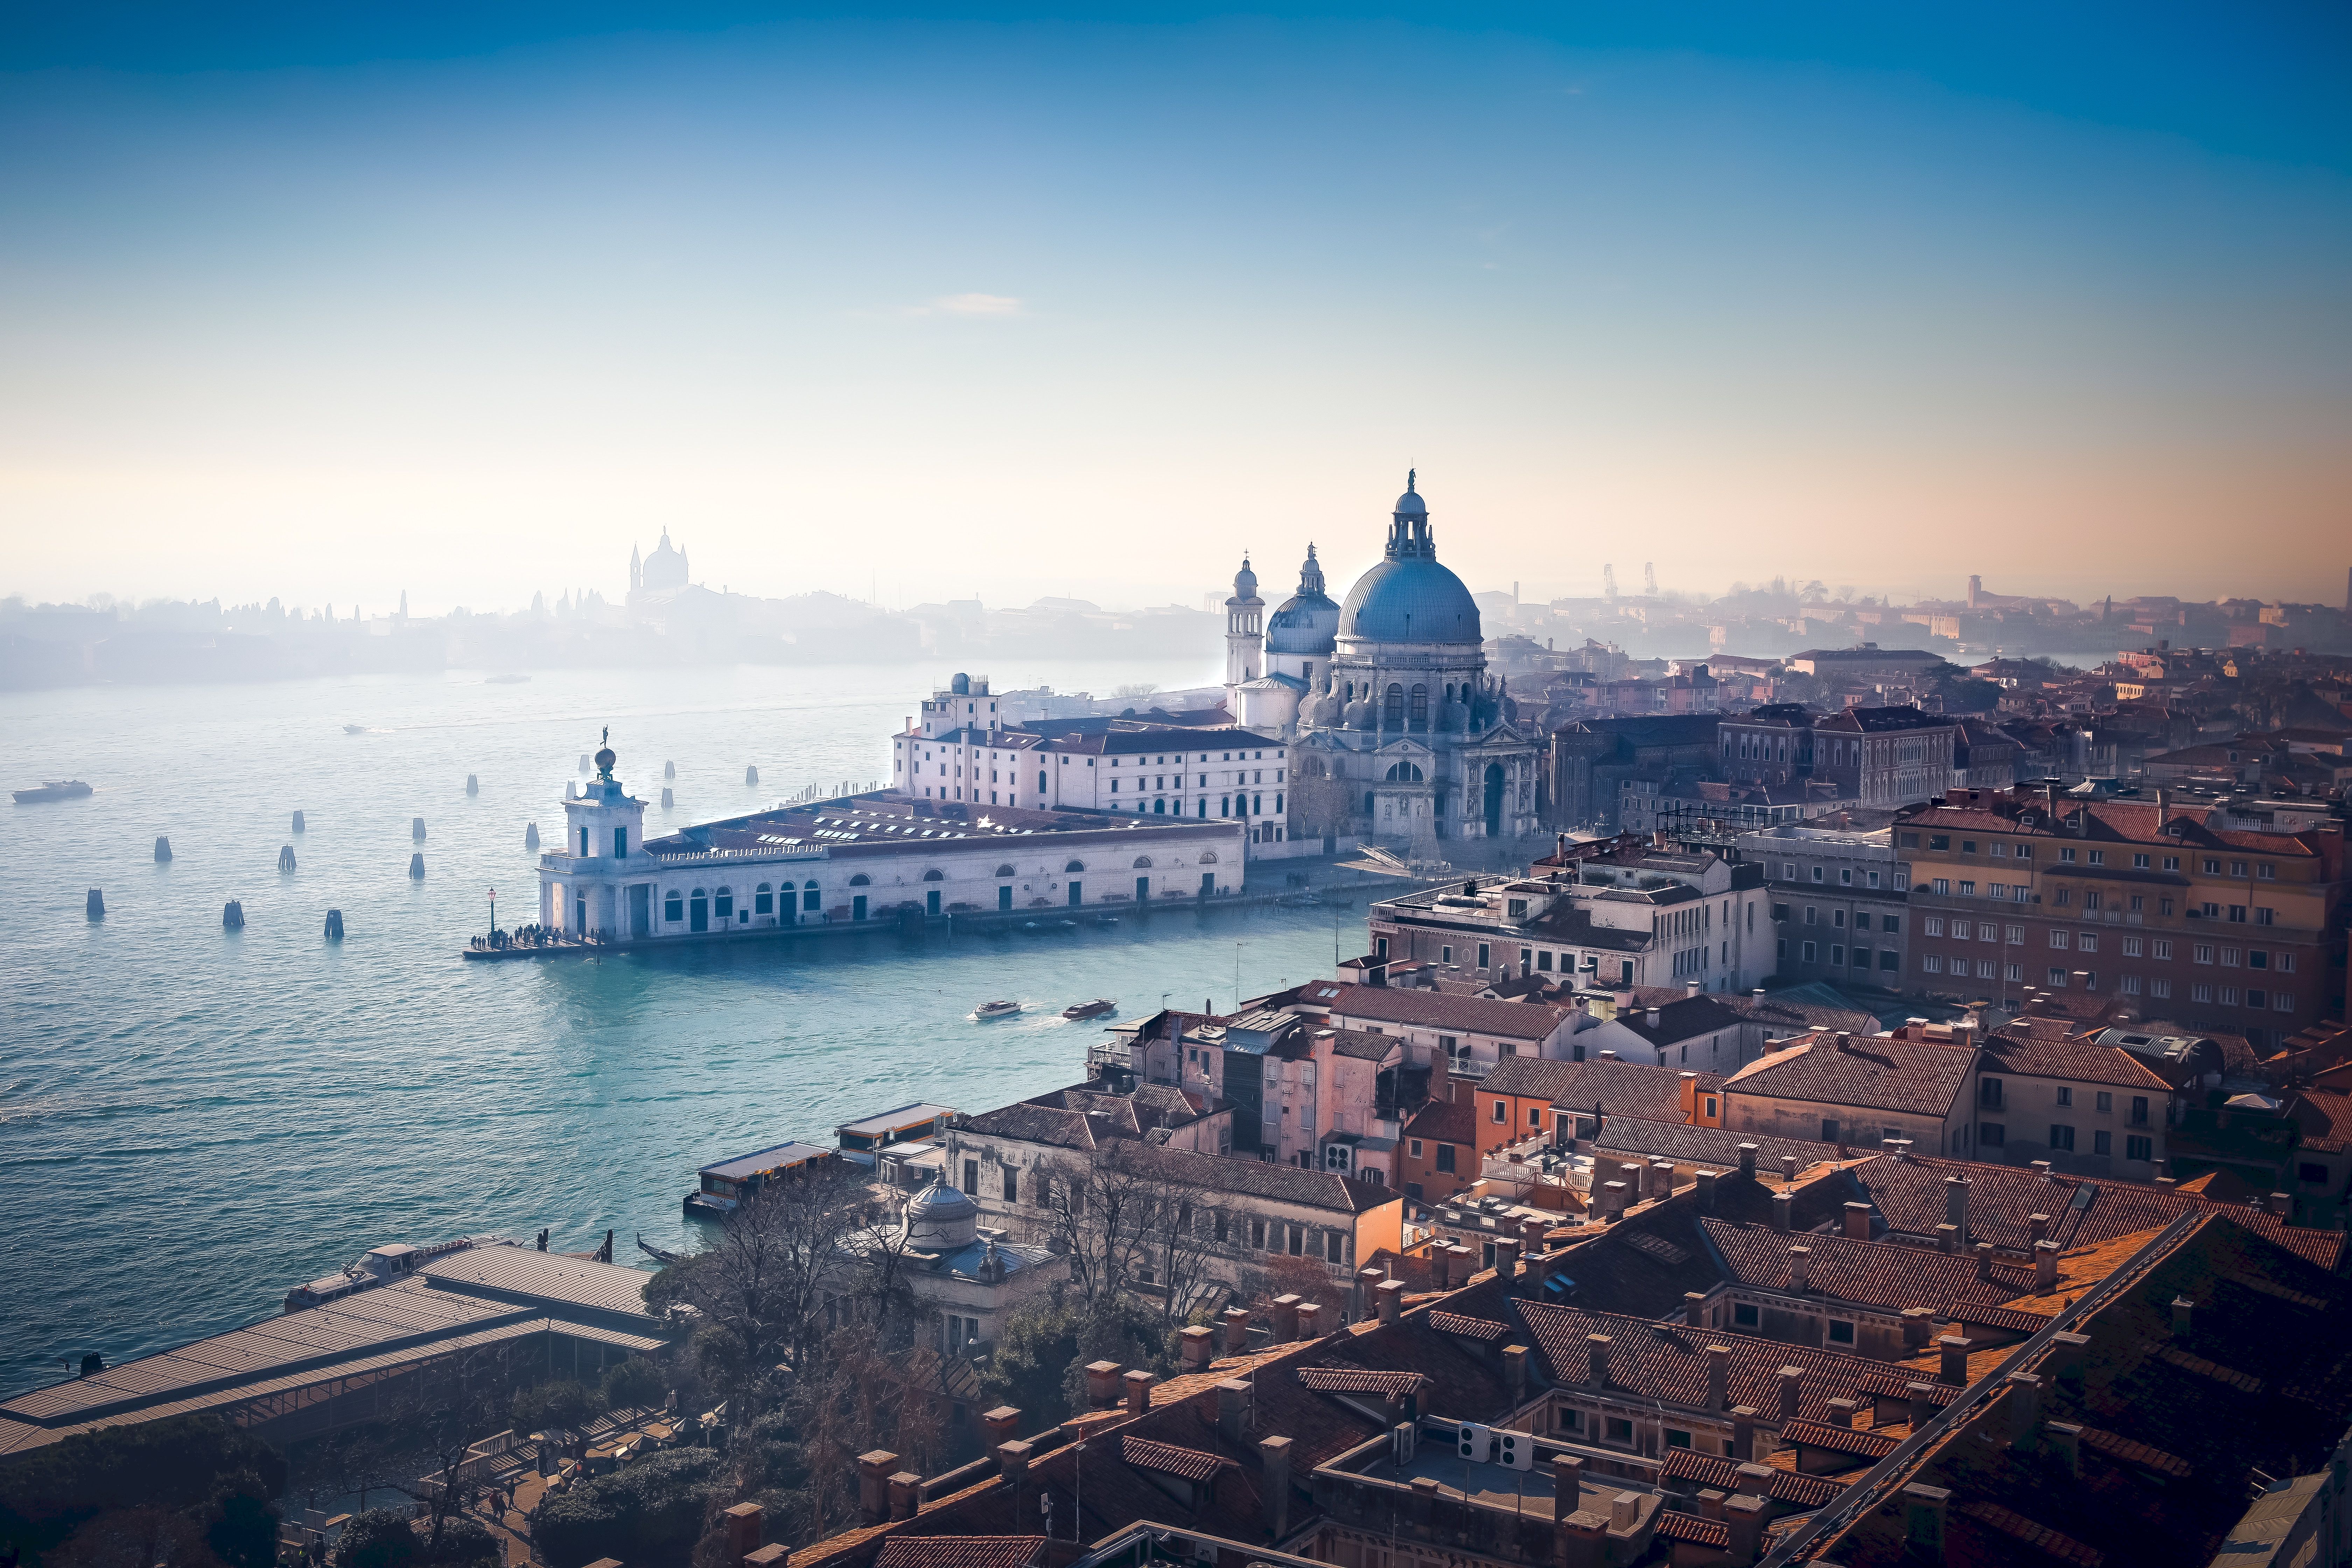 venice, architecture, cities, rivers, italy, view from above, channel